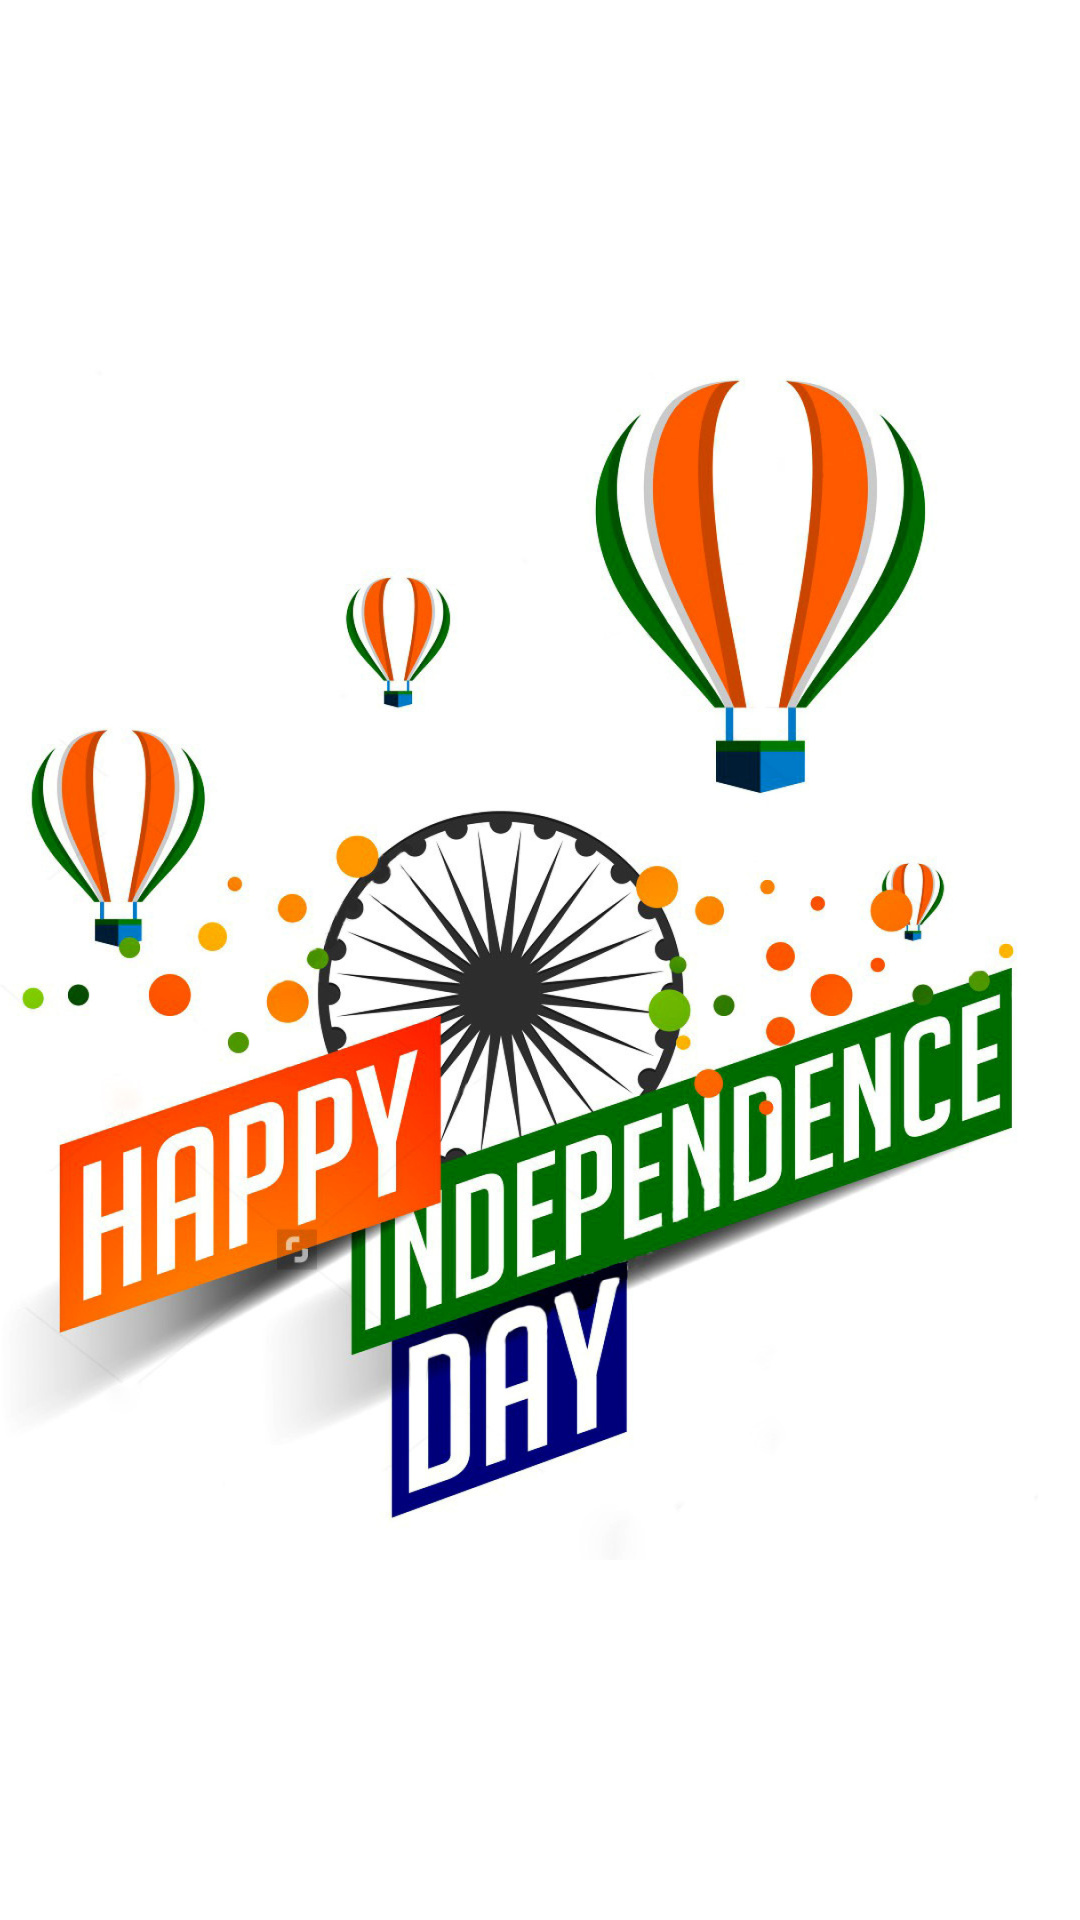 Happy Independence Day of India 2016, 2017 wallpaper 1080x1920